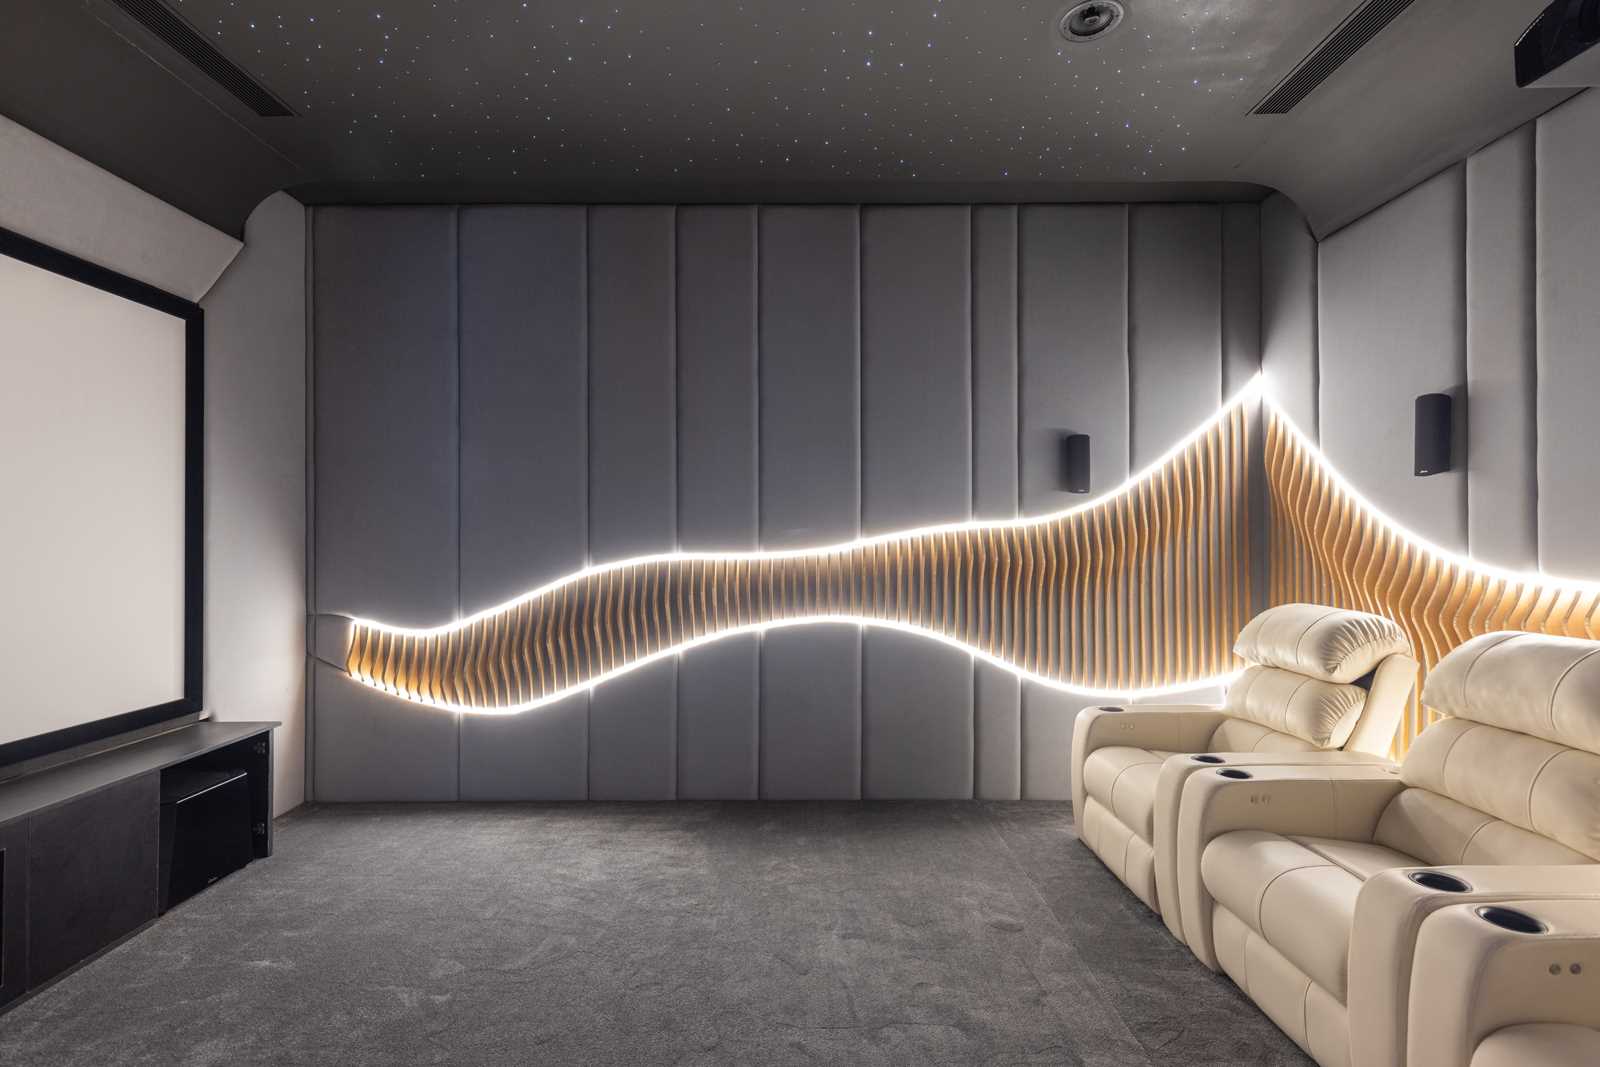 In this media room, the upholstered walls are punctuated by wooden ribs and LED lighting.